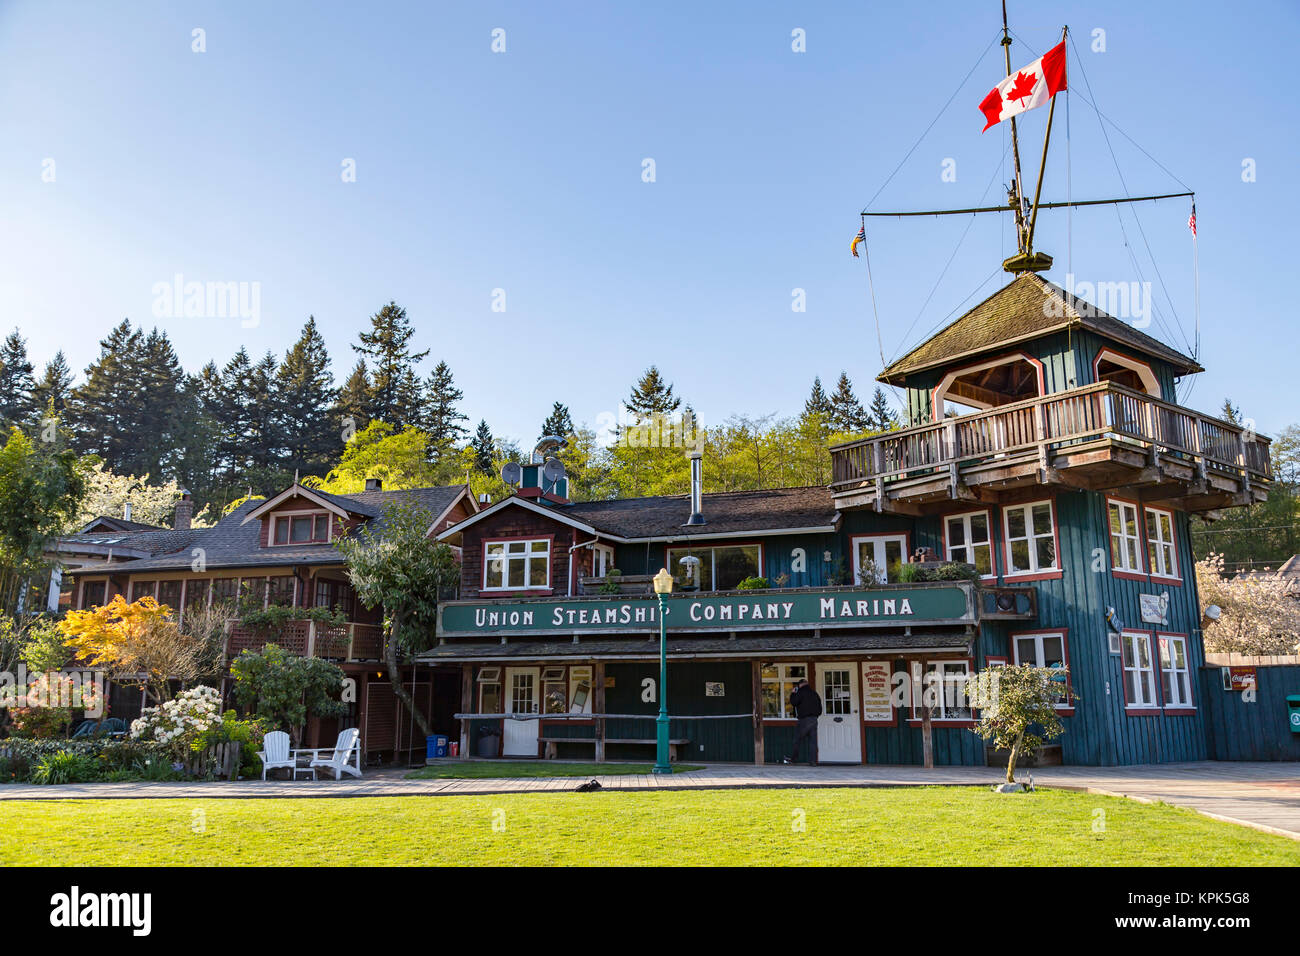 The heritage site tourist attraction Union Steamship Building in Snug Cove, Bowen Island welcoming tourists as they come off the ferry from Vancouv... Stock Photo